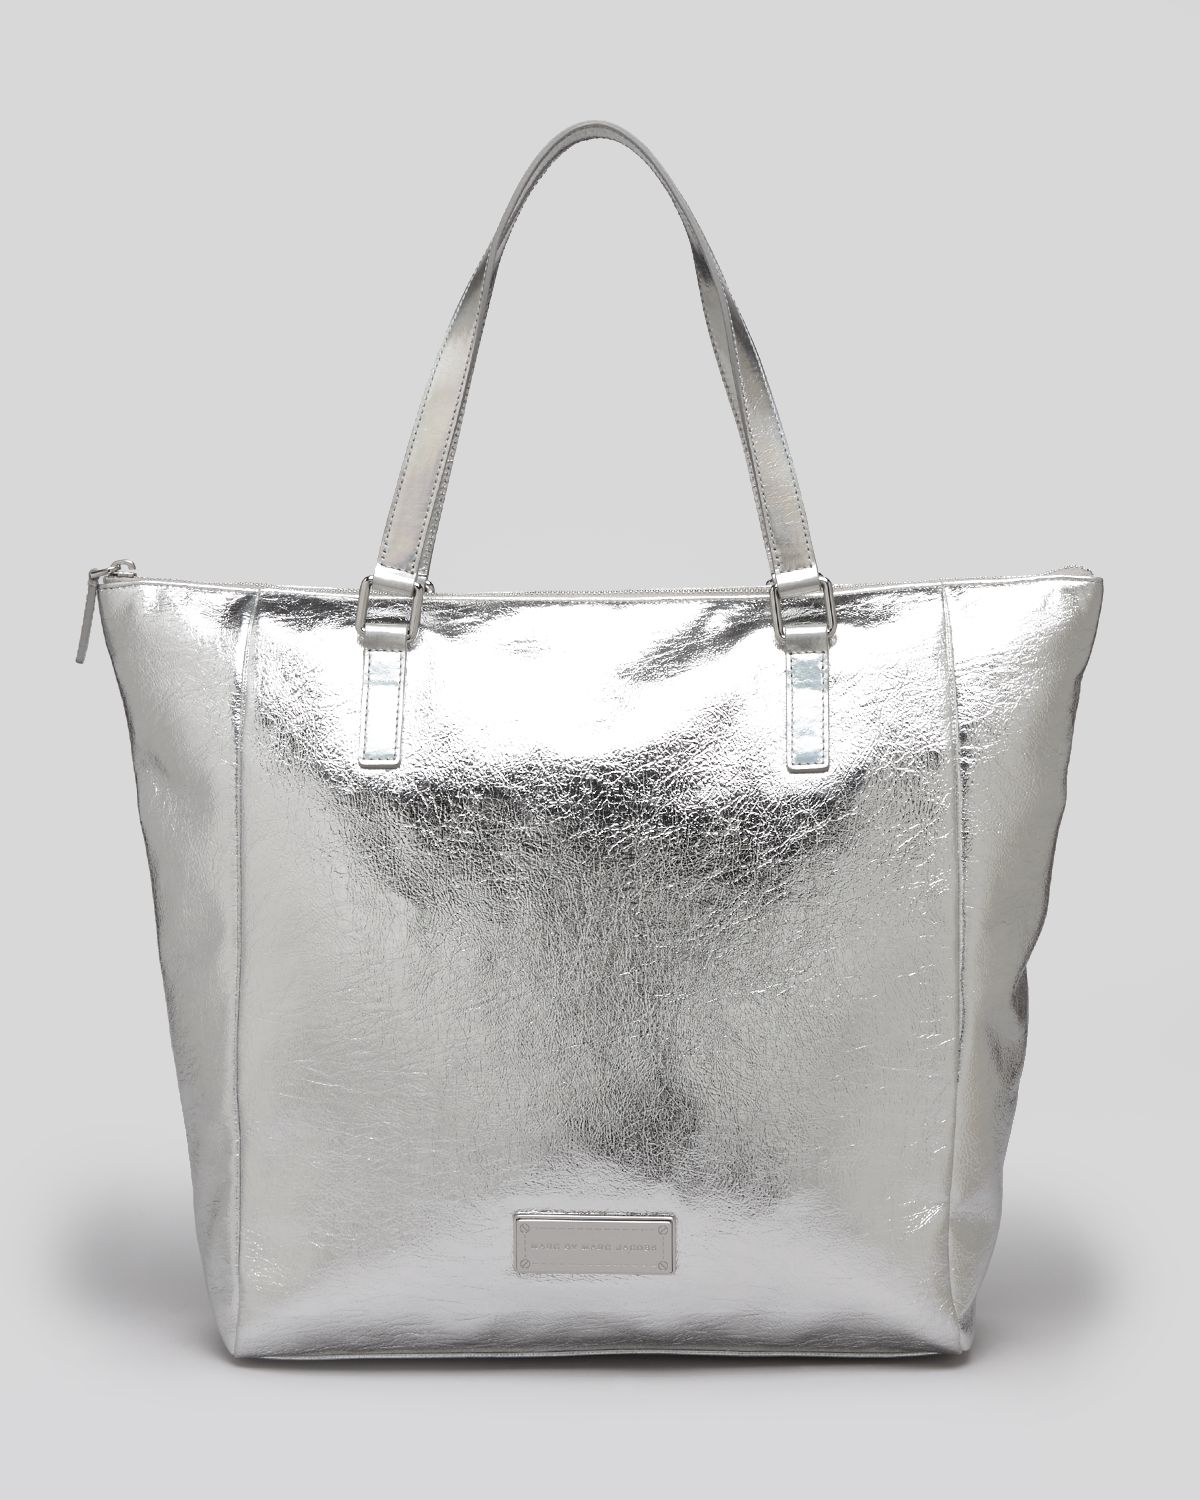 Lyst - Marc By Marc Jacobs Tote Take Me Totes Foil in Metallic